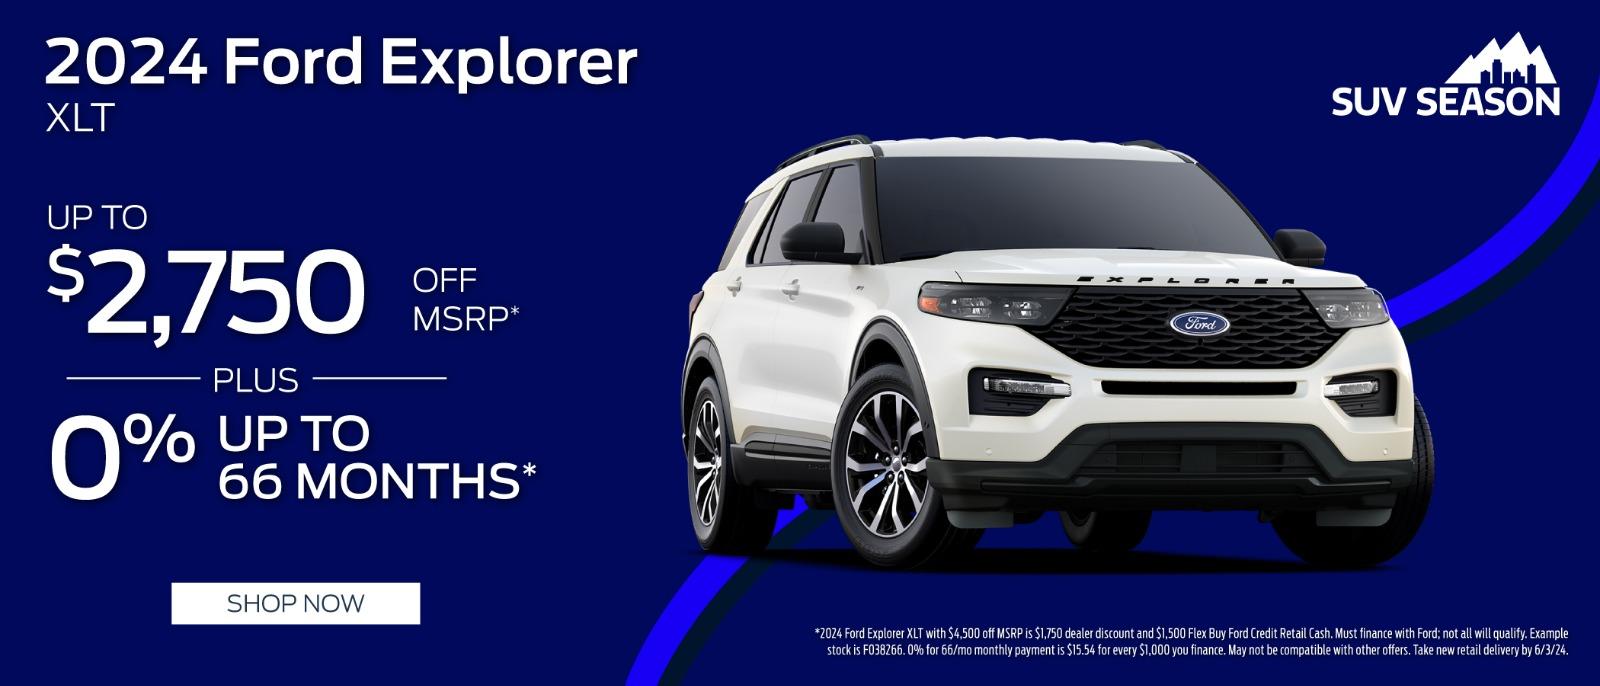 2024 Ford Explorer $2,750 Off MSRP plus up to 0% for 66 months